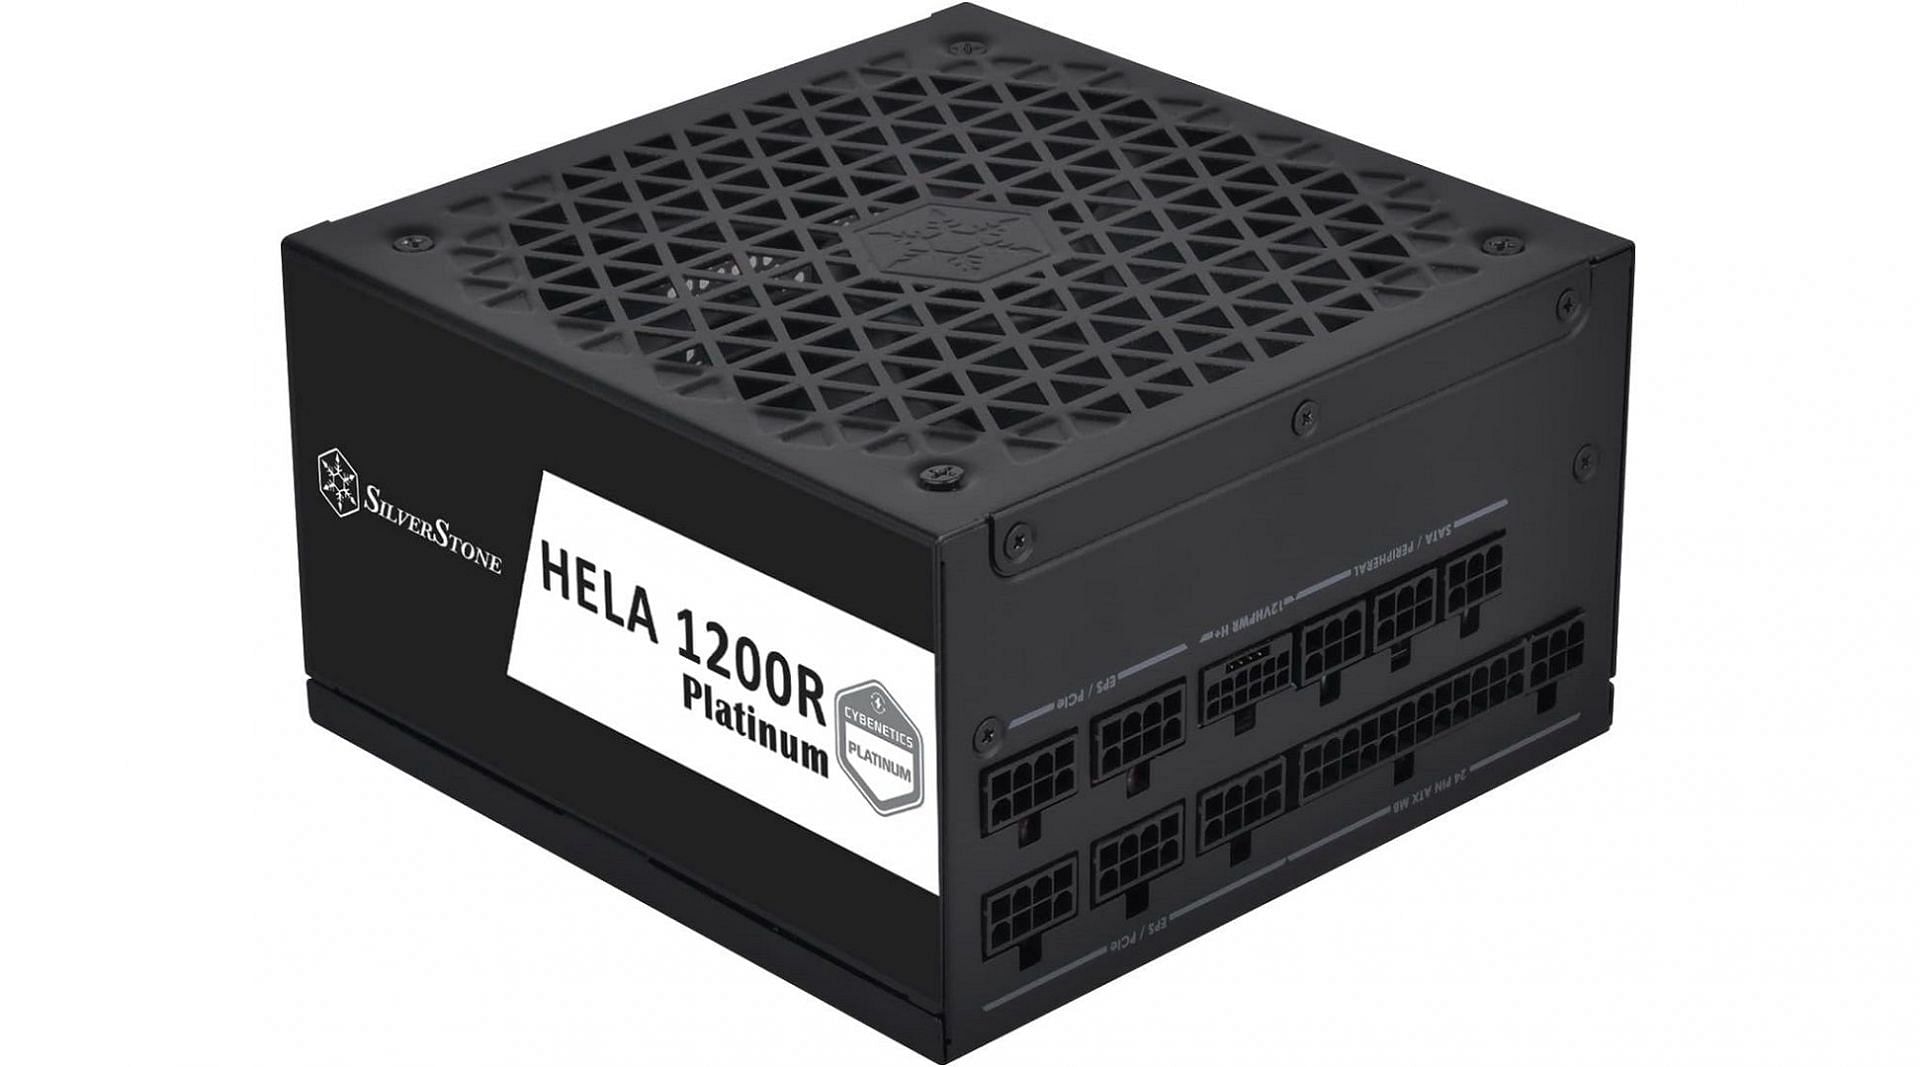 SilverStone Technology HELA 1200R 1200W power supply (Image via SilverStone and Consumer Tech Review (High-Speed)/YouTube)